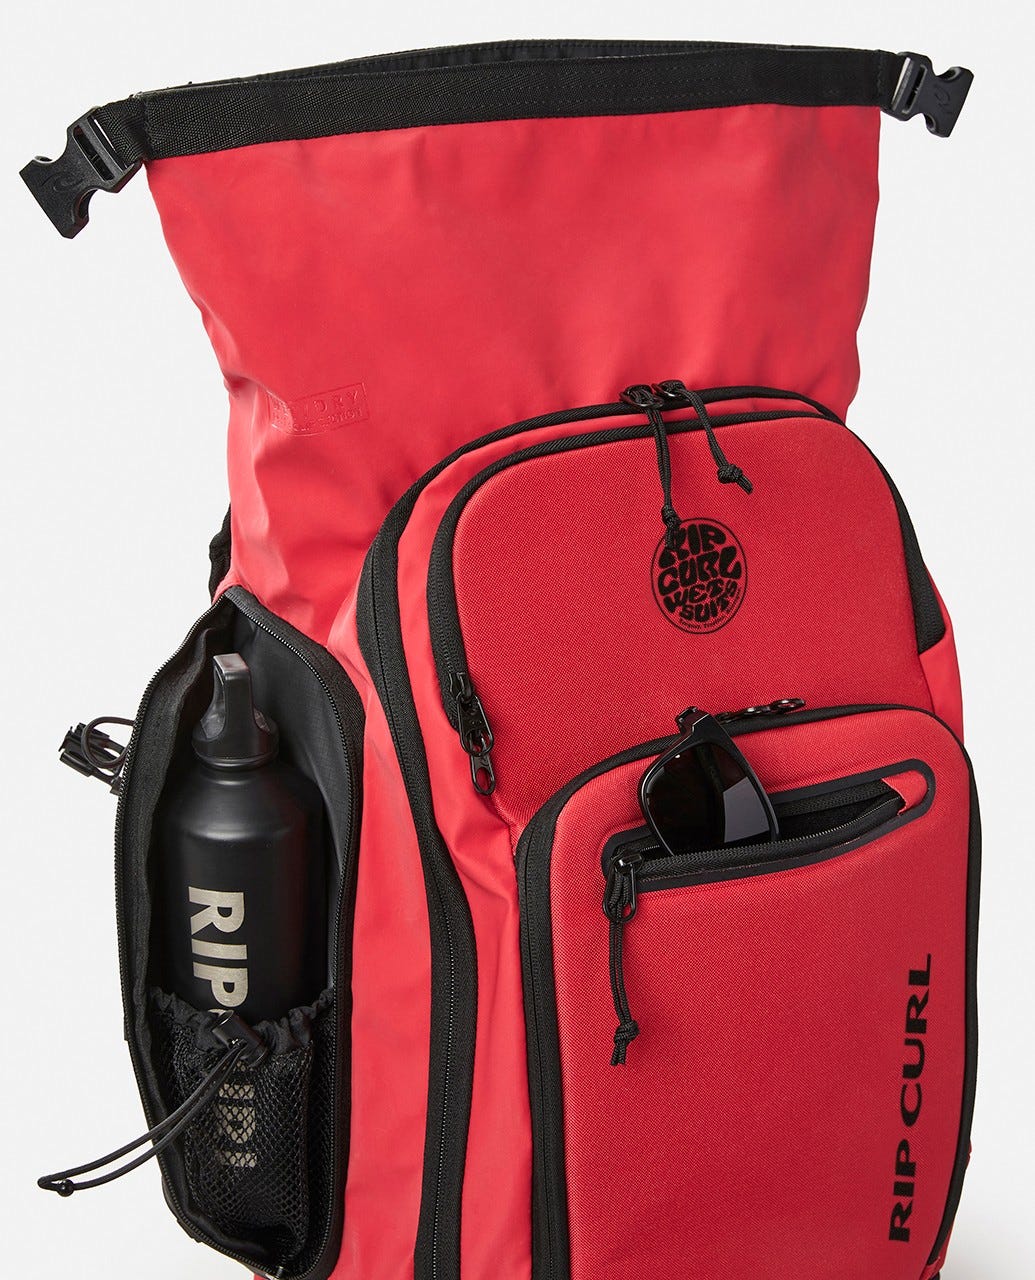 Diariamente Emborracharse Fuera Rip Curl F-Light Surf 40L Hydro Eco Backpack – Sand Surf Co.